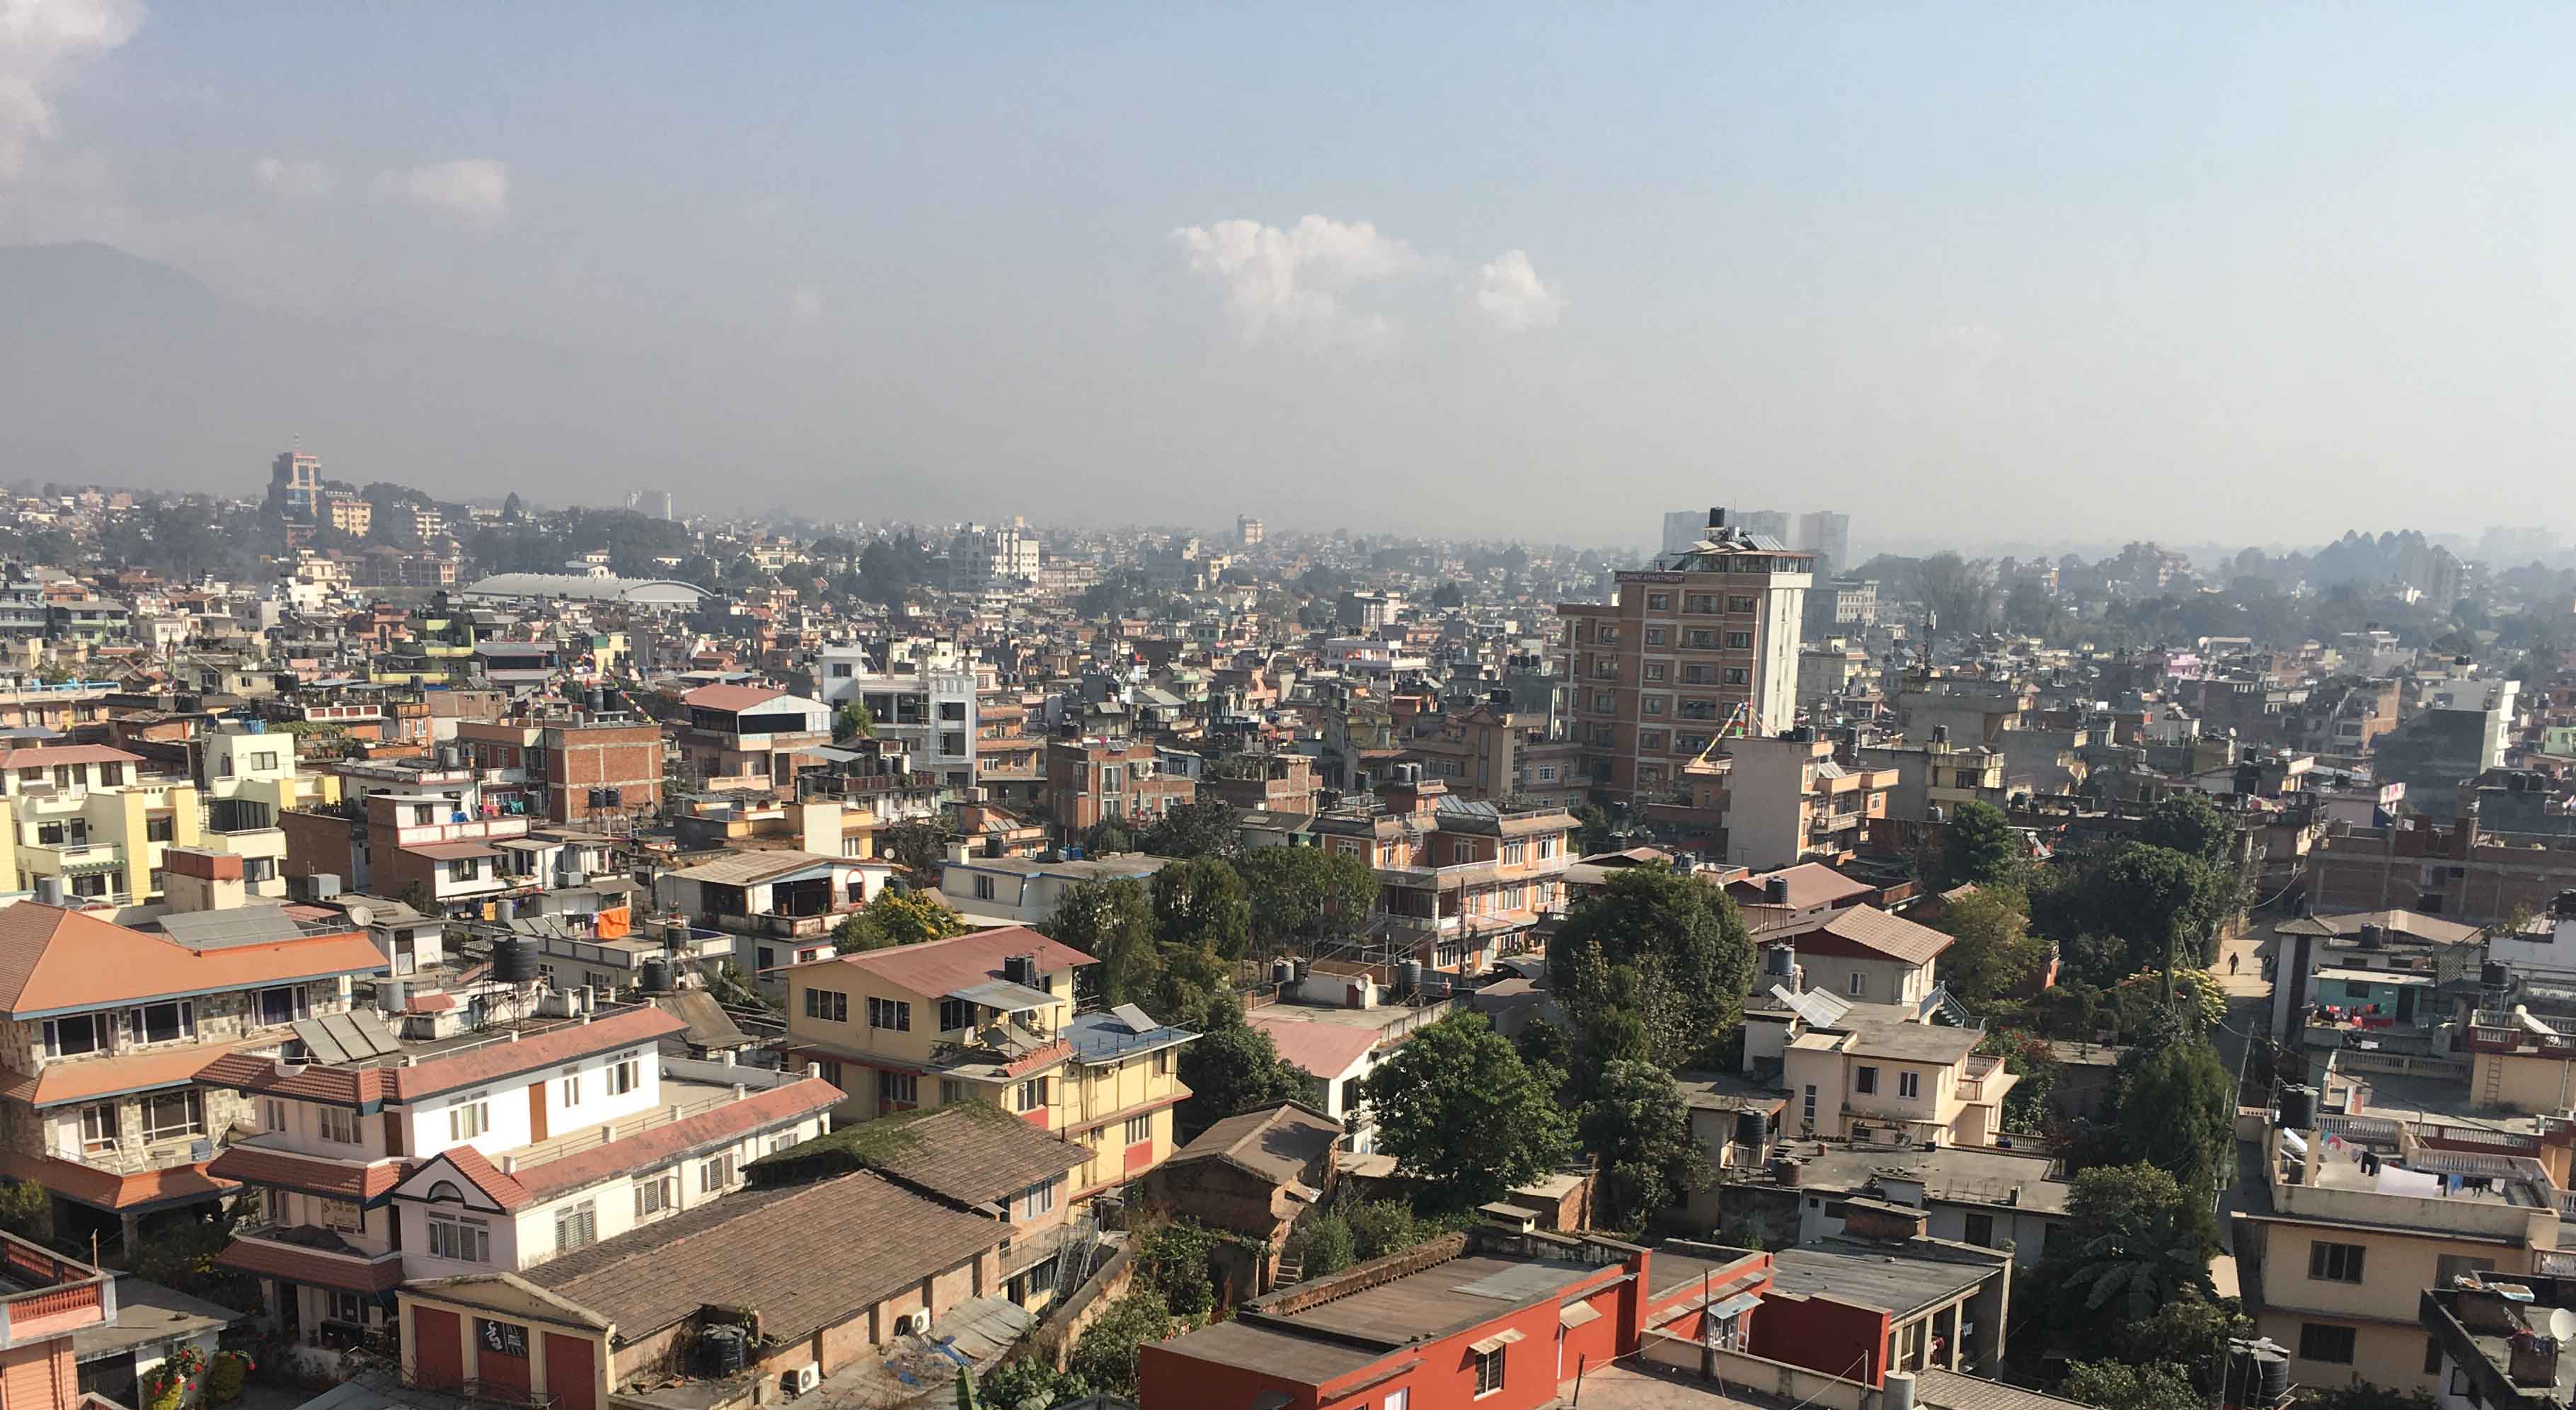 Photo of buildings and streets in Nepal. 